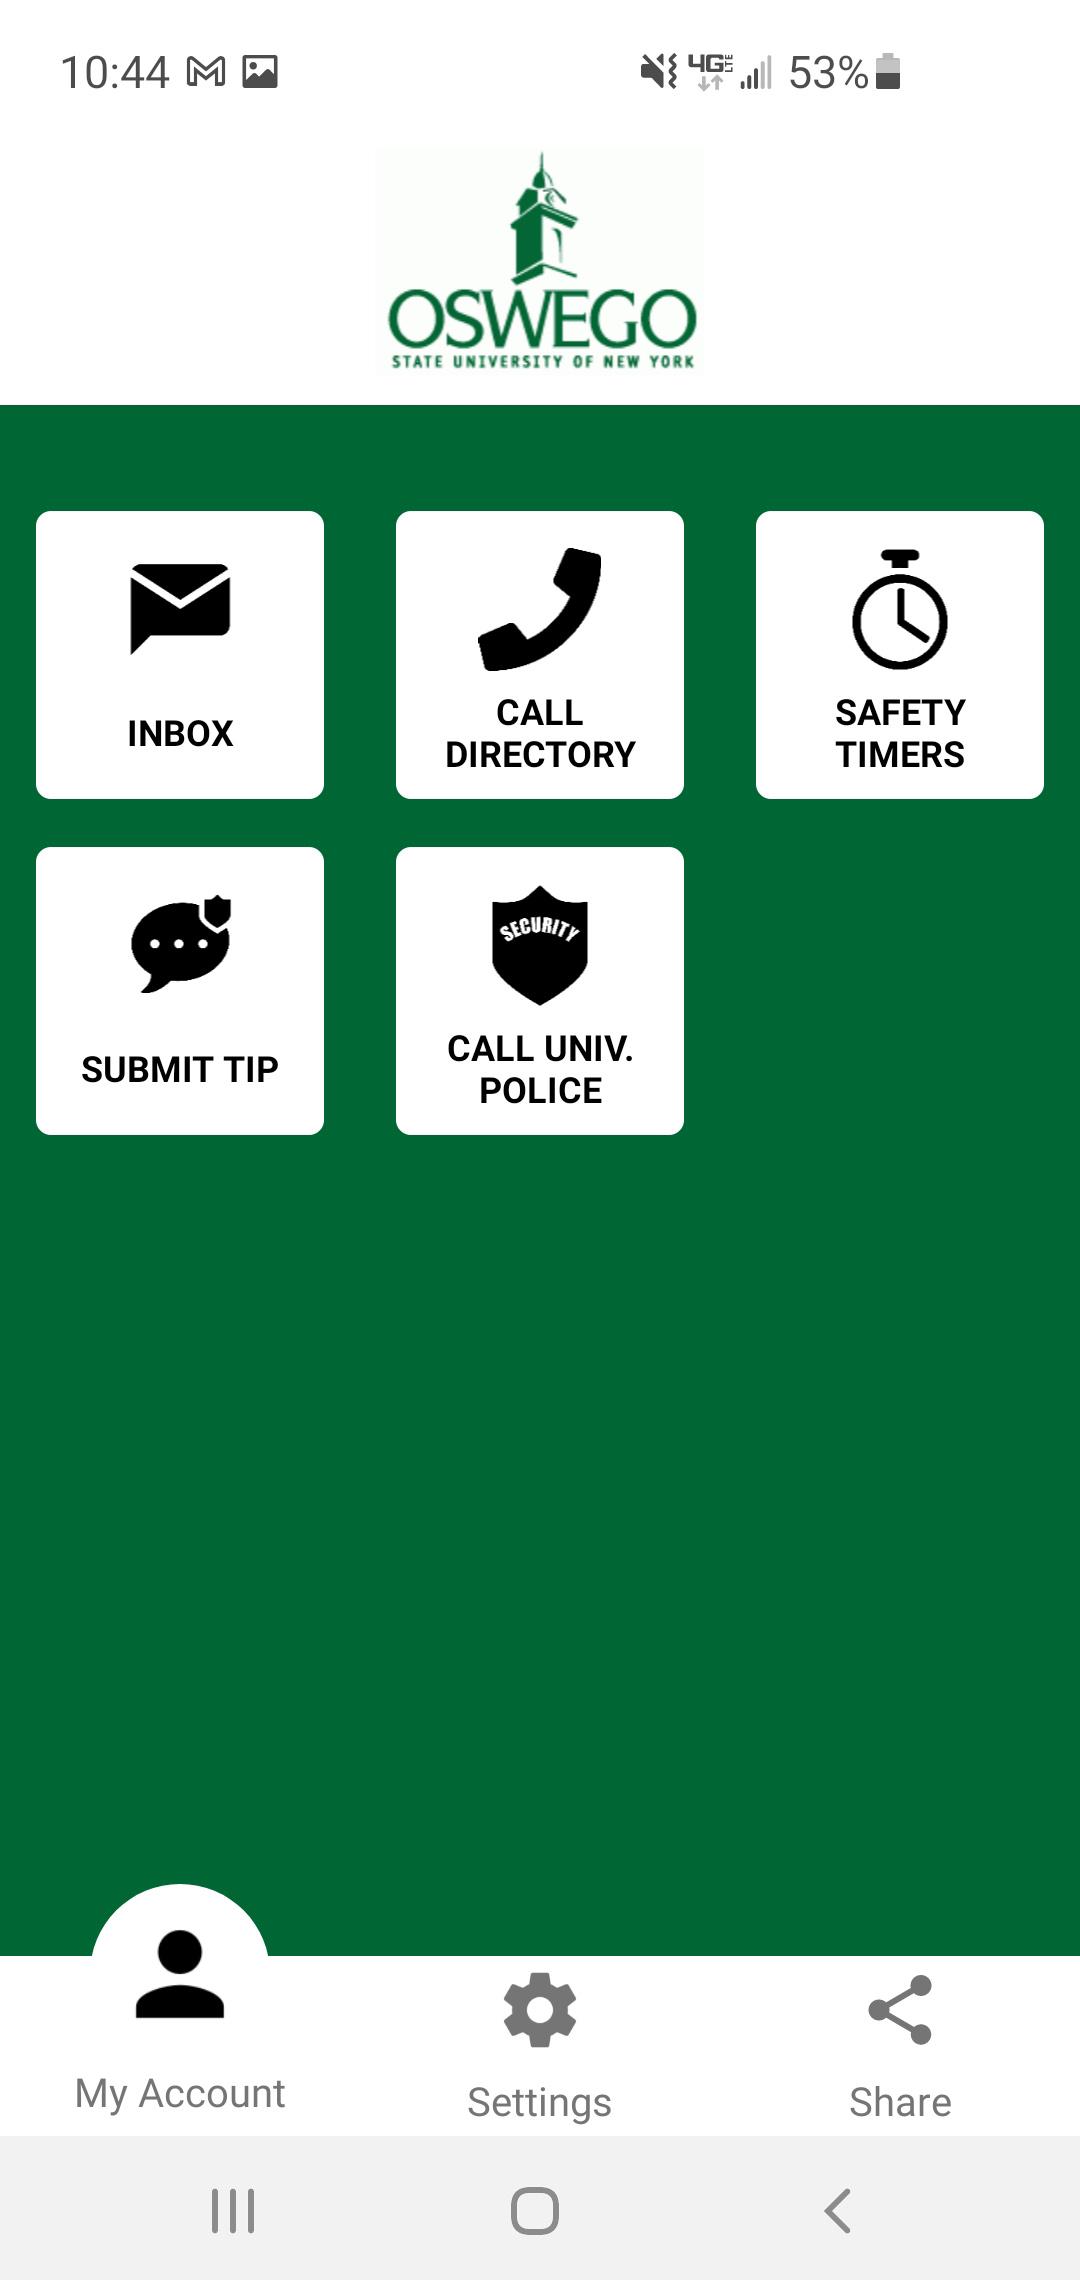 The Oswego Guardian app includes such options as an inbox, call directory, safety timer, tip submission and ability to contact University Police